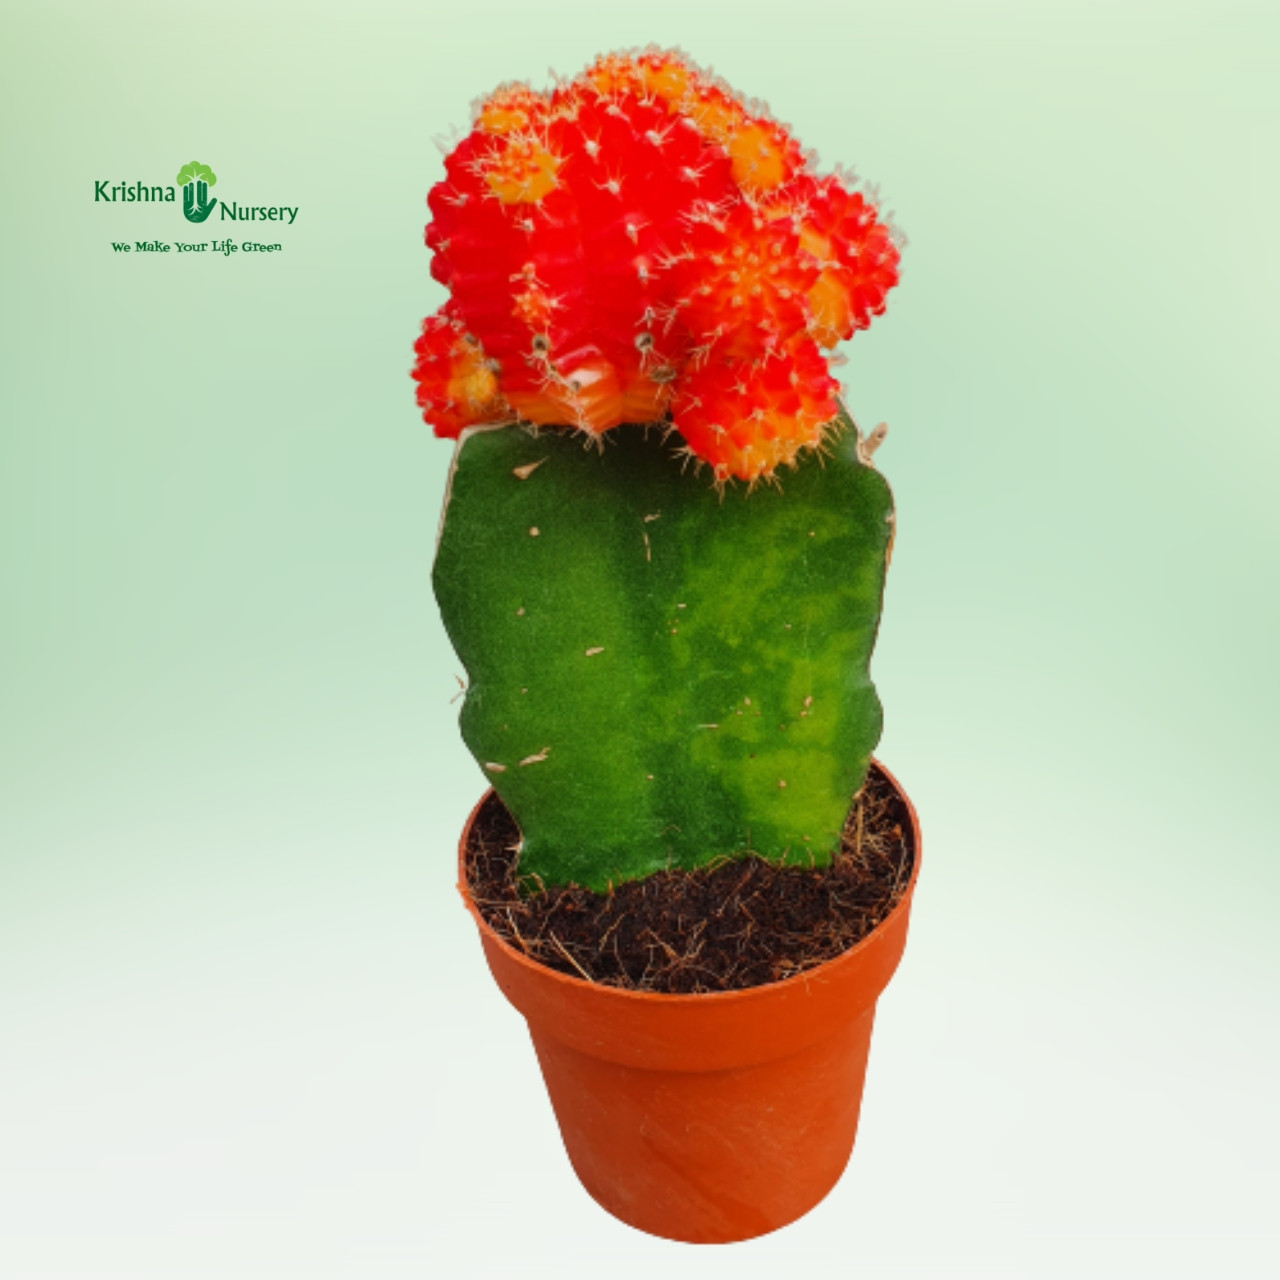 moon-cactus-plant-available-colors-red-orange-pink